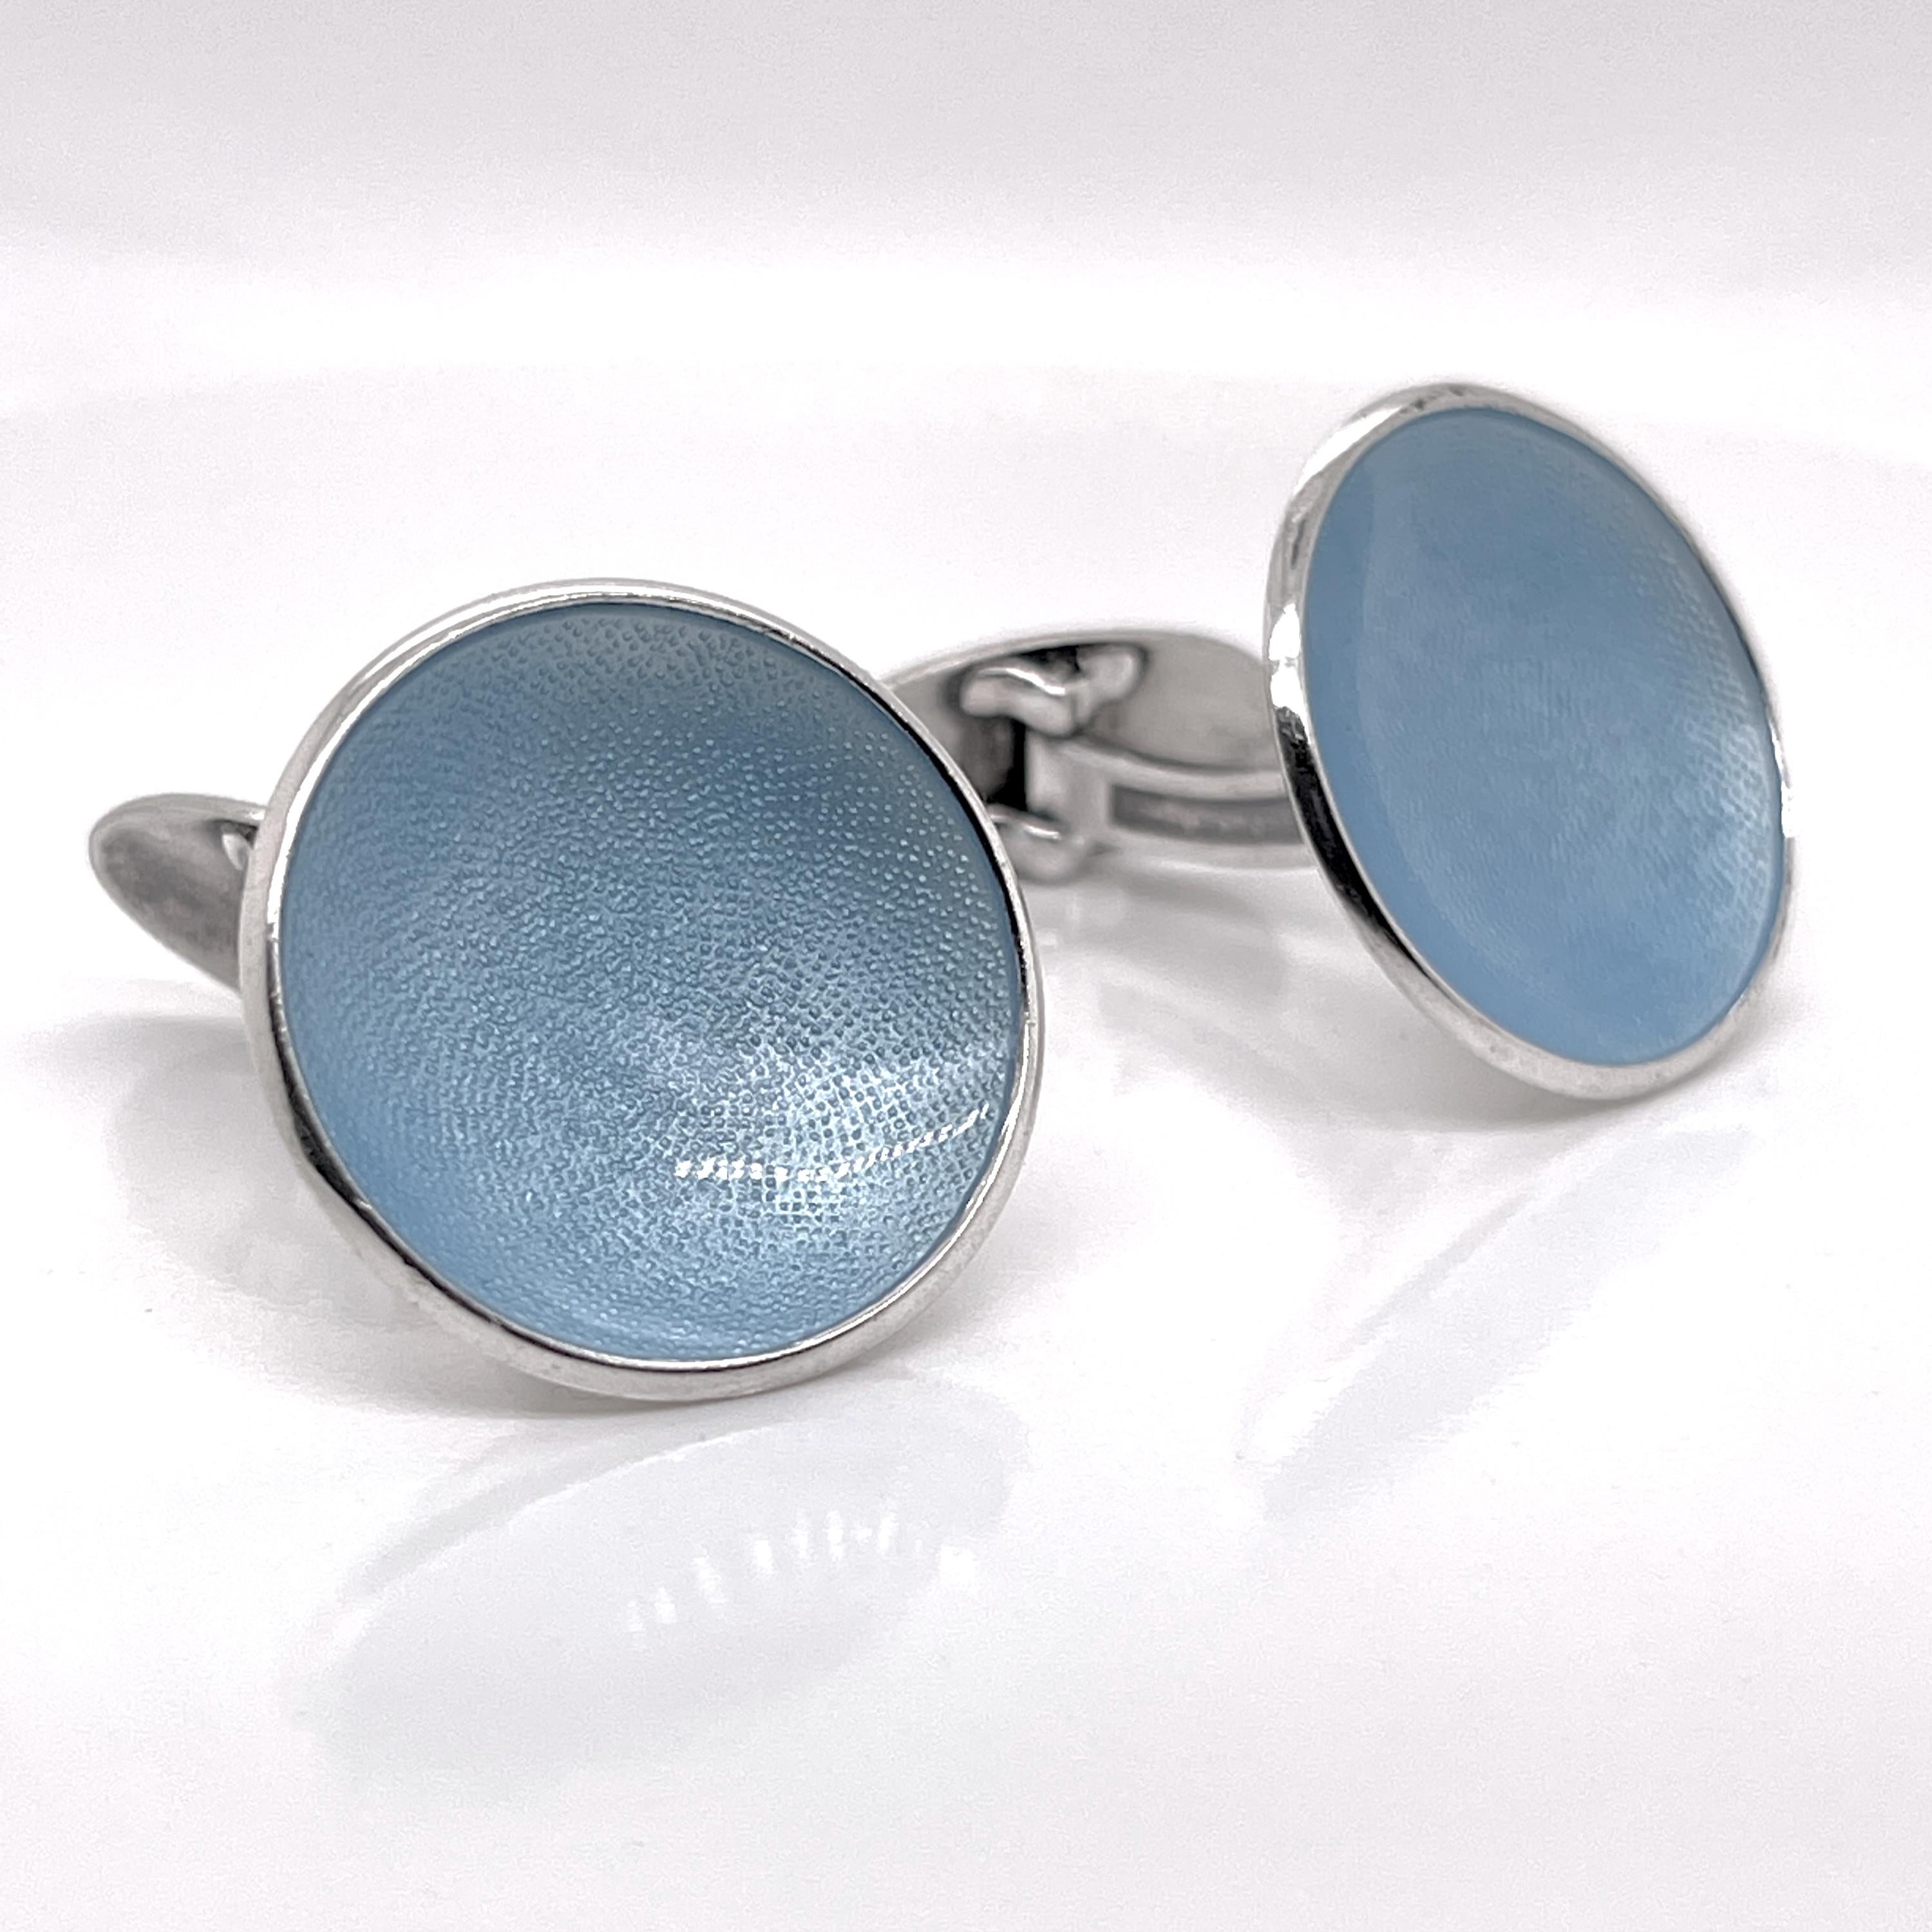 A fine pair of Norwegian cufflinks.

By Einar Modahl of Oslo, Norway.

In sterling silver with blue guilloche enamel.

Simply great Scandinavian Modern cufflinks!

Date:
Mid-20th Century

Overall Condition:
They are in overall good, as-pictured,